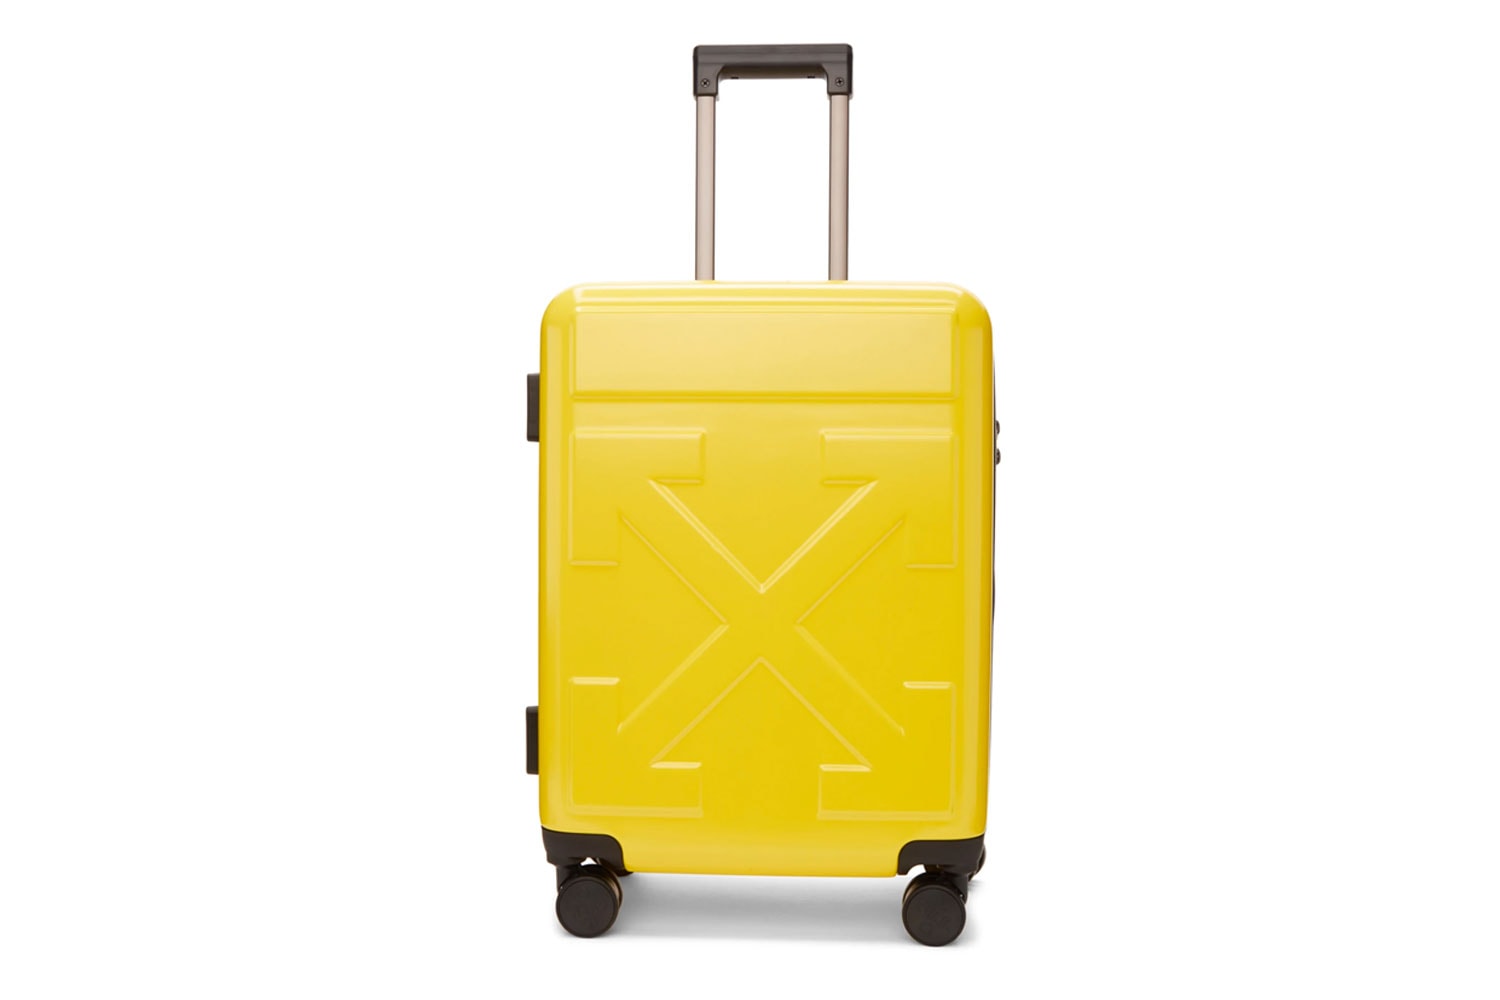 RIMOWA とのコラボレーションも記憶に新しい Off-White™️ が オリジナルのスーツケース3型をリリース Off-White Arrows Suitcase Release SSENSE Suitcases Luggage 